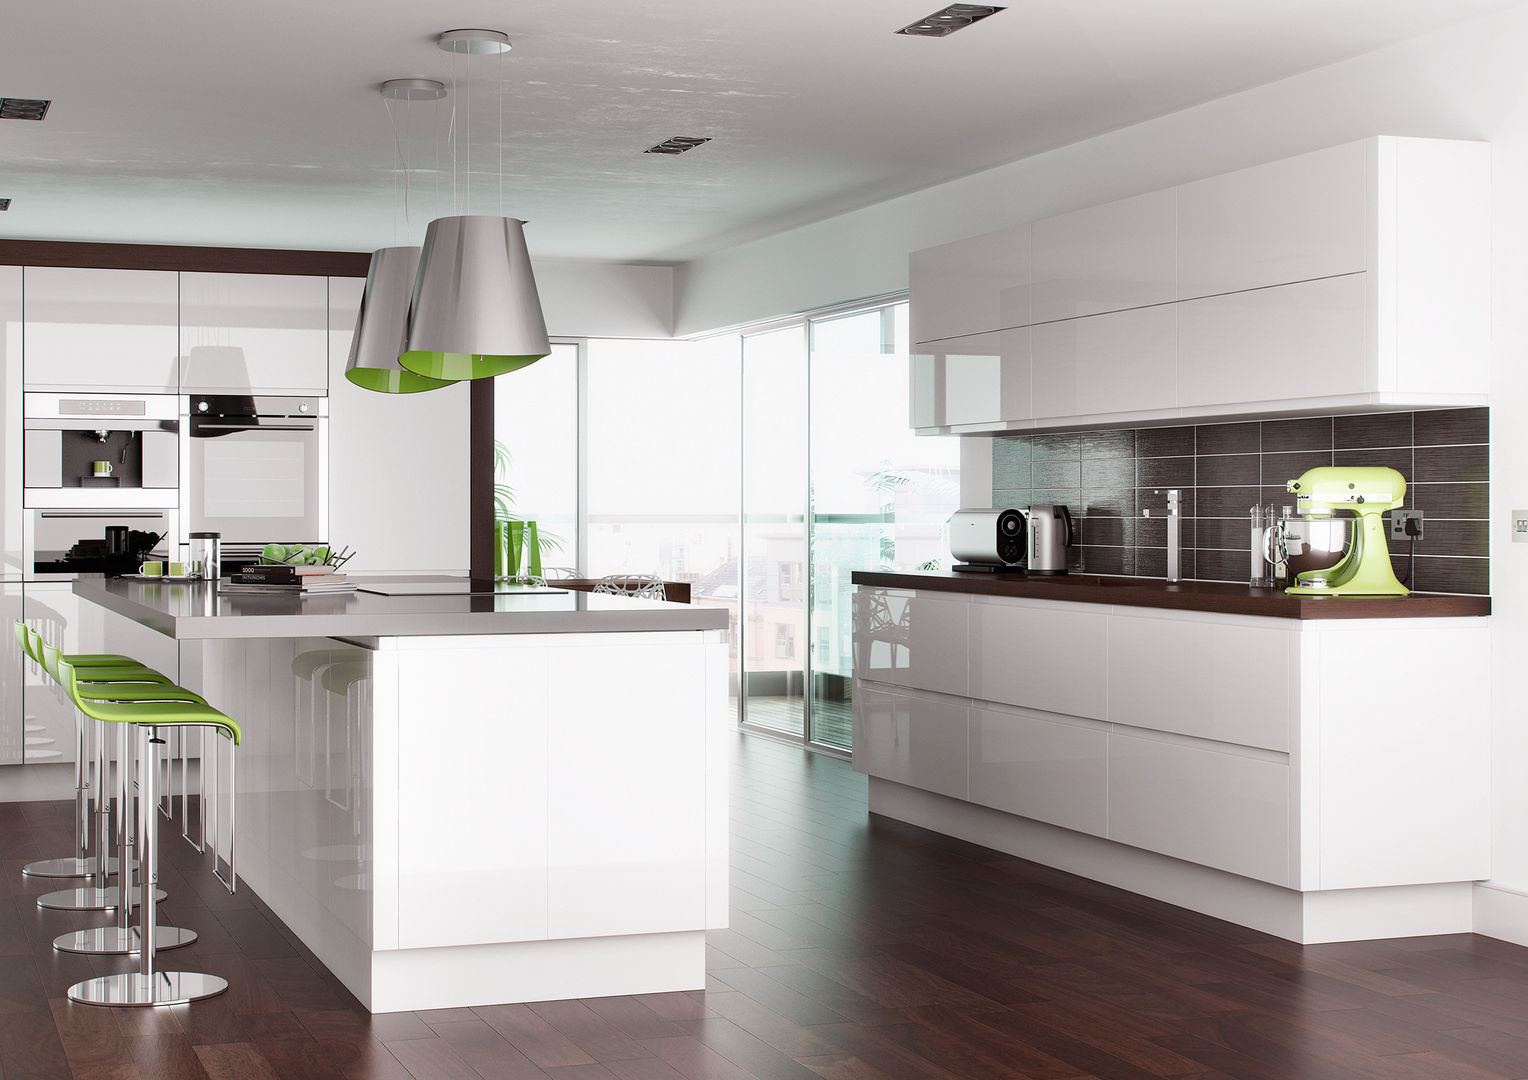 Lucente Gloss White Fitted Kitchens London Metro Wardrobes London مطبخ رفوف وأدراج